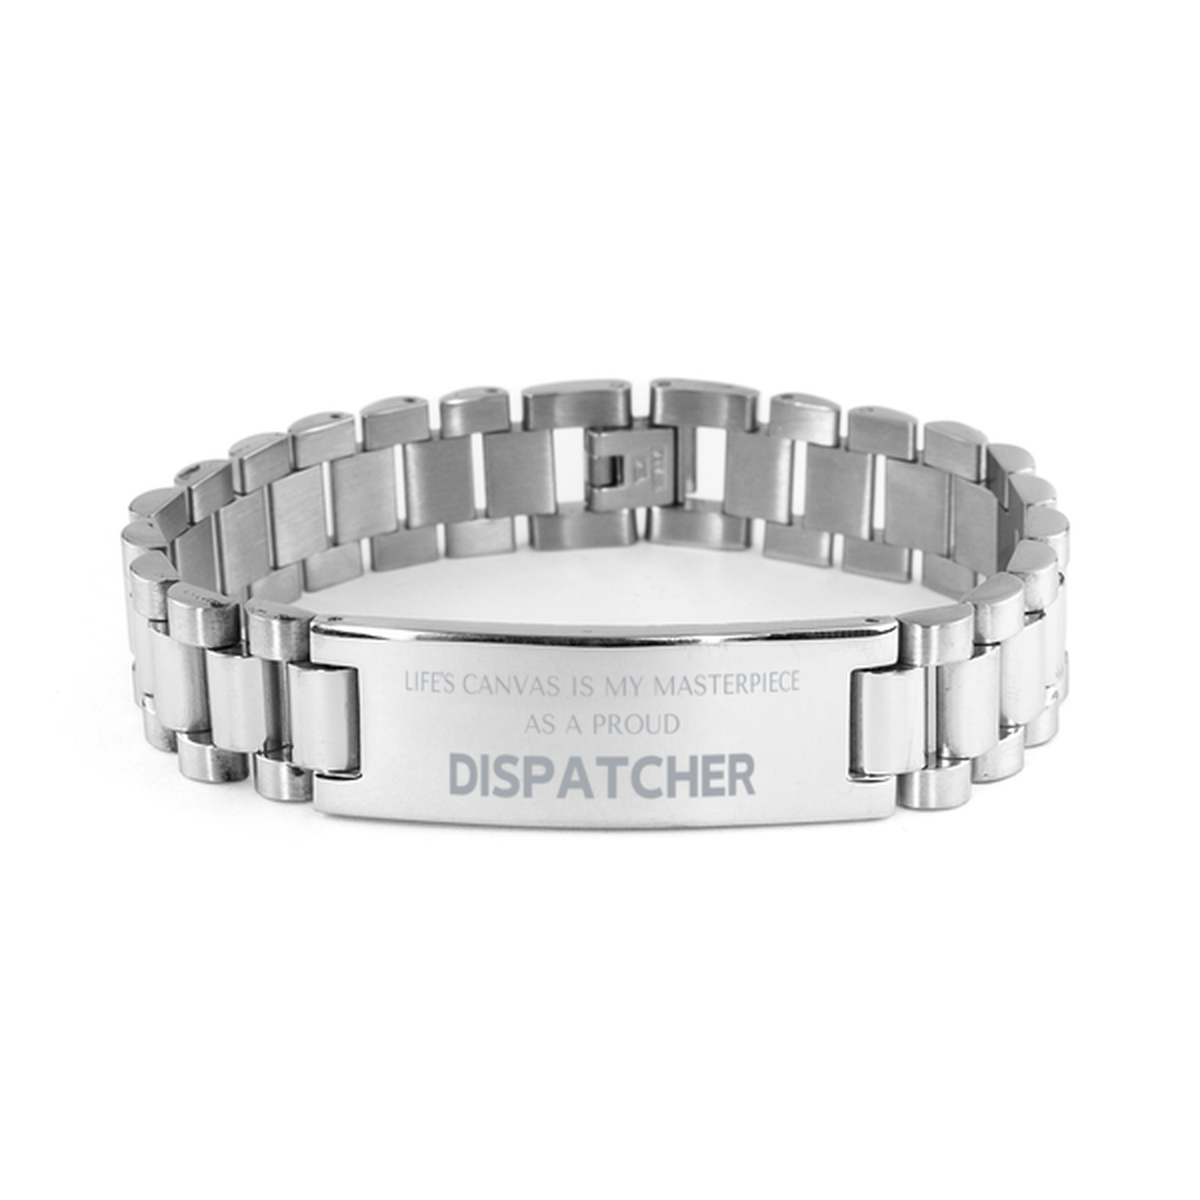 Proud Dispatcher Gifts, Life's canvas is my masterpiece, Epic Birthday Christmas Unique Ladder Stainless Steel Bracelet For Dispatcher, Coworkers, Men, Women, Friends